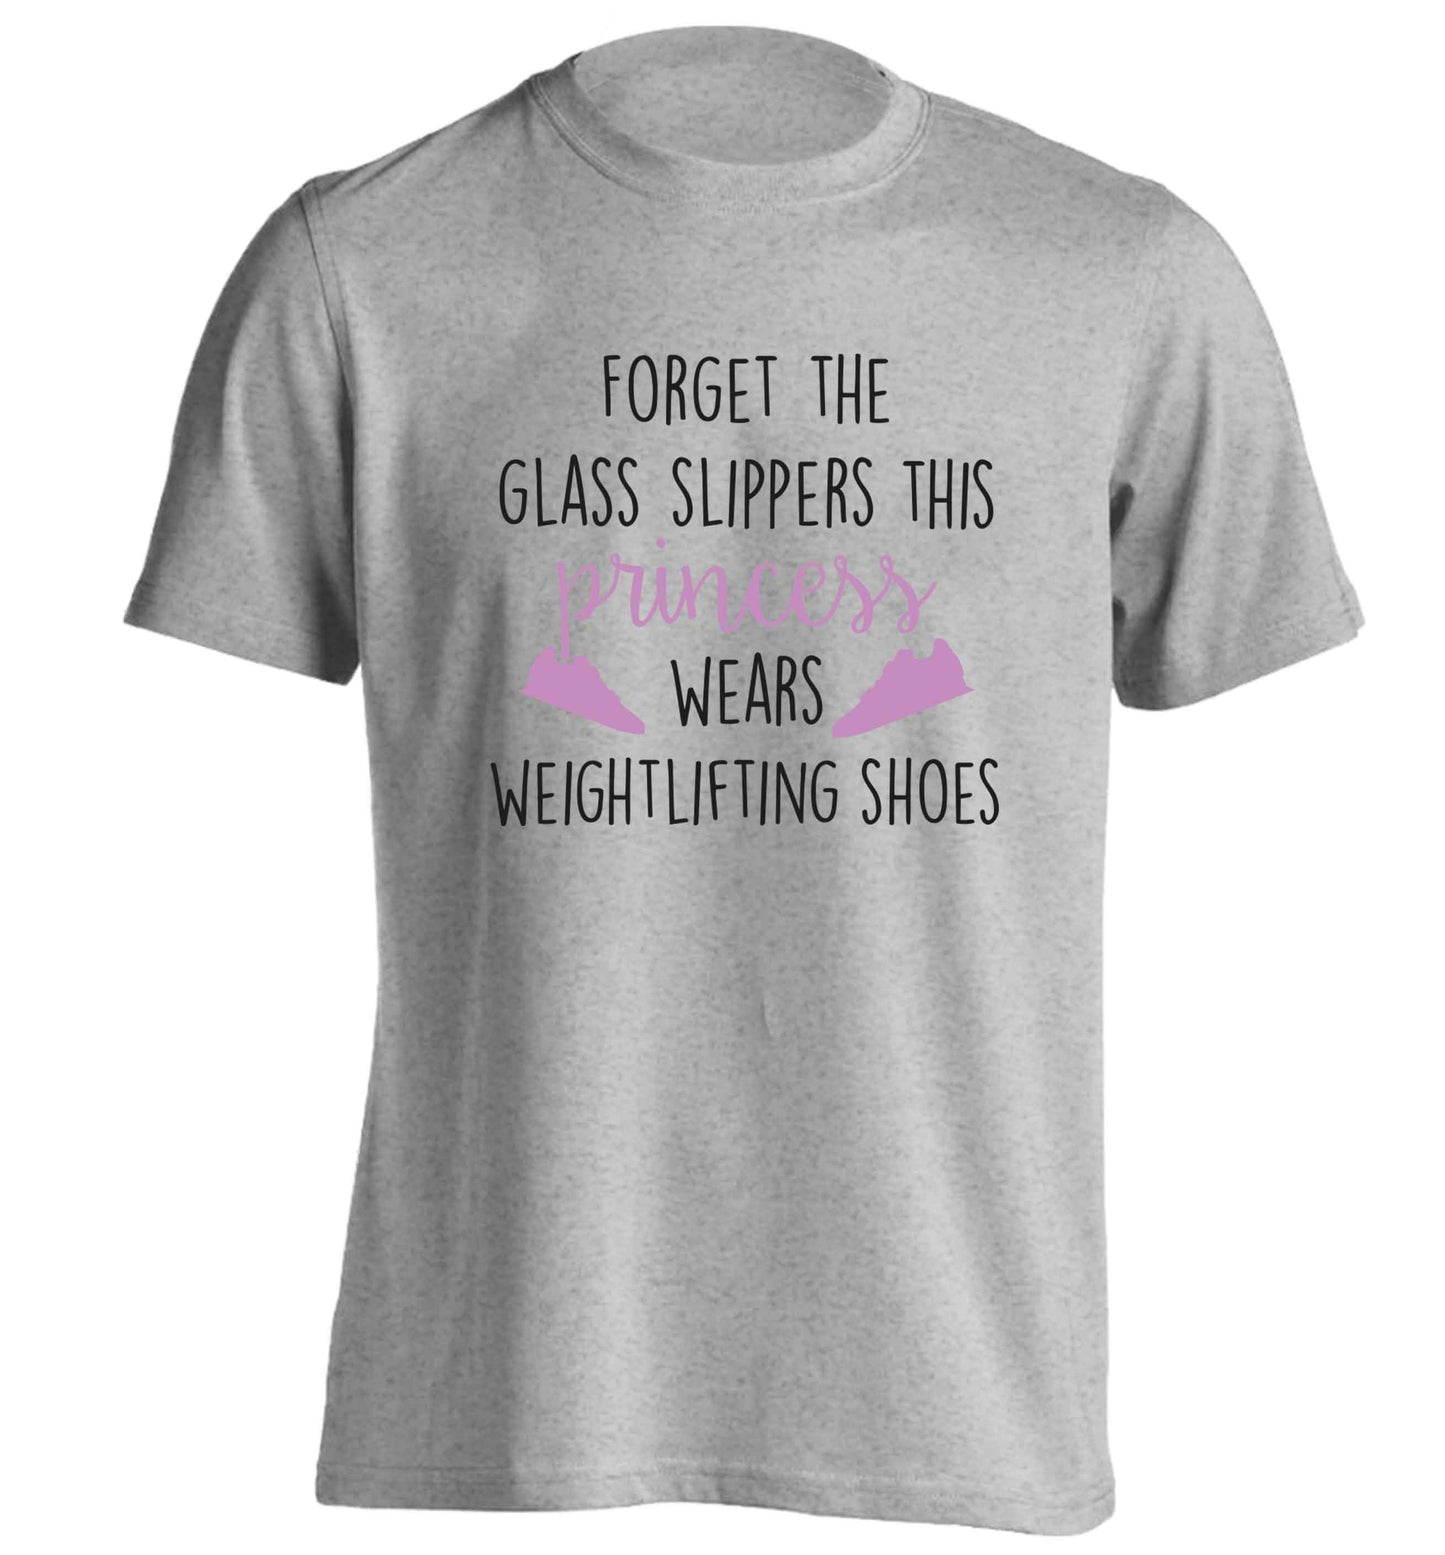 Forget the glass slippers this princess wears weightlifting shoes adults unisex grey Tshirt 2XL